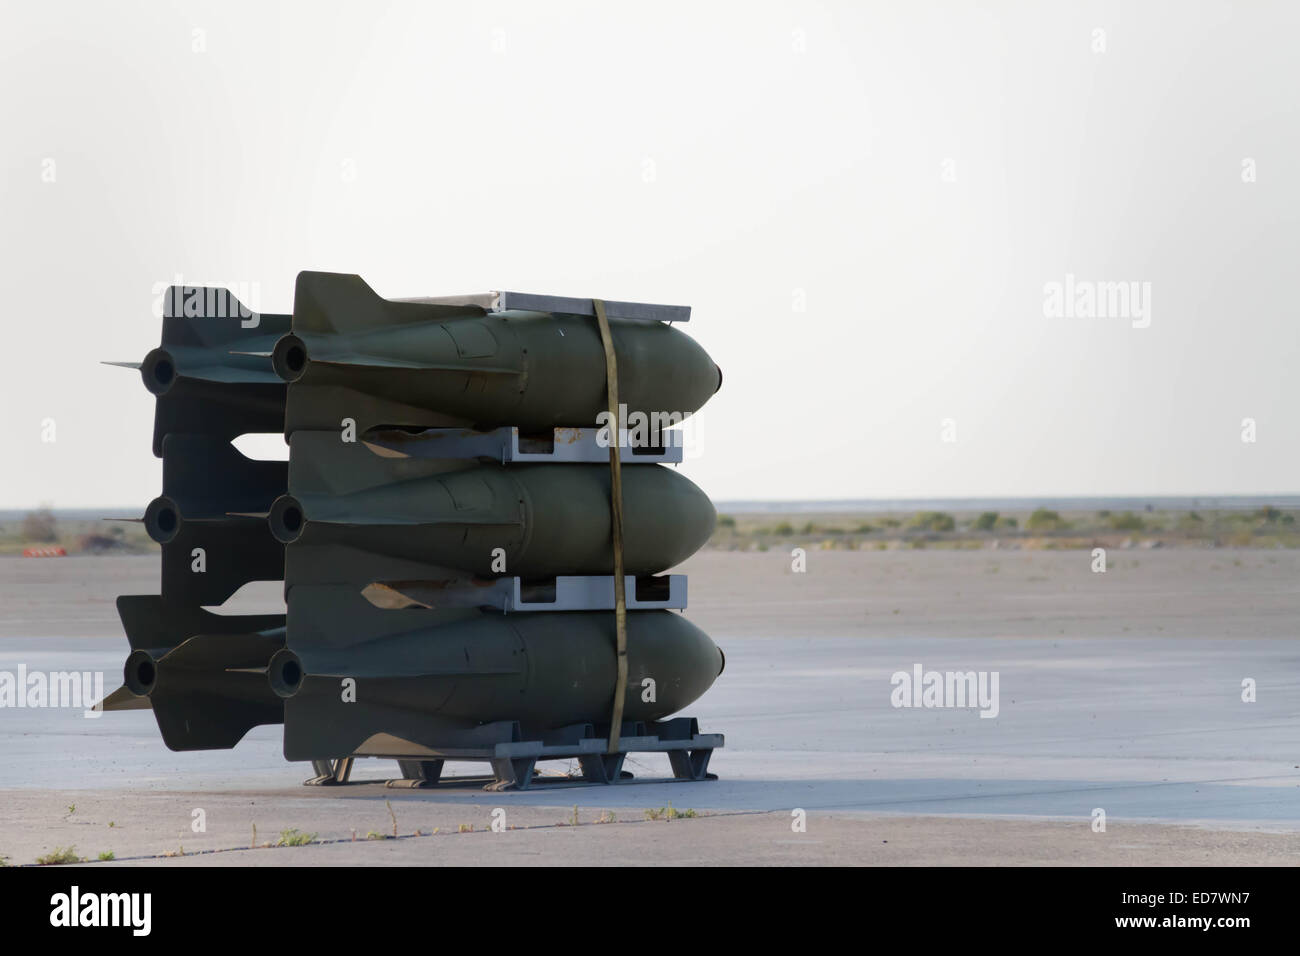 Outdated bombs sitting on an airplane runway in the desert. Stock Photo